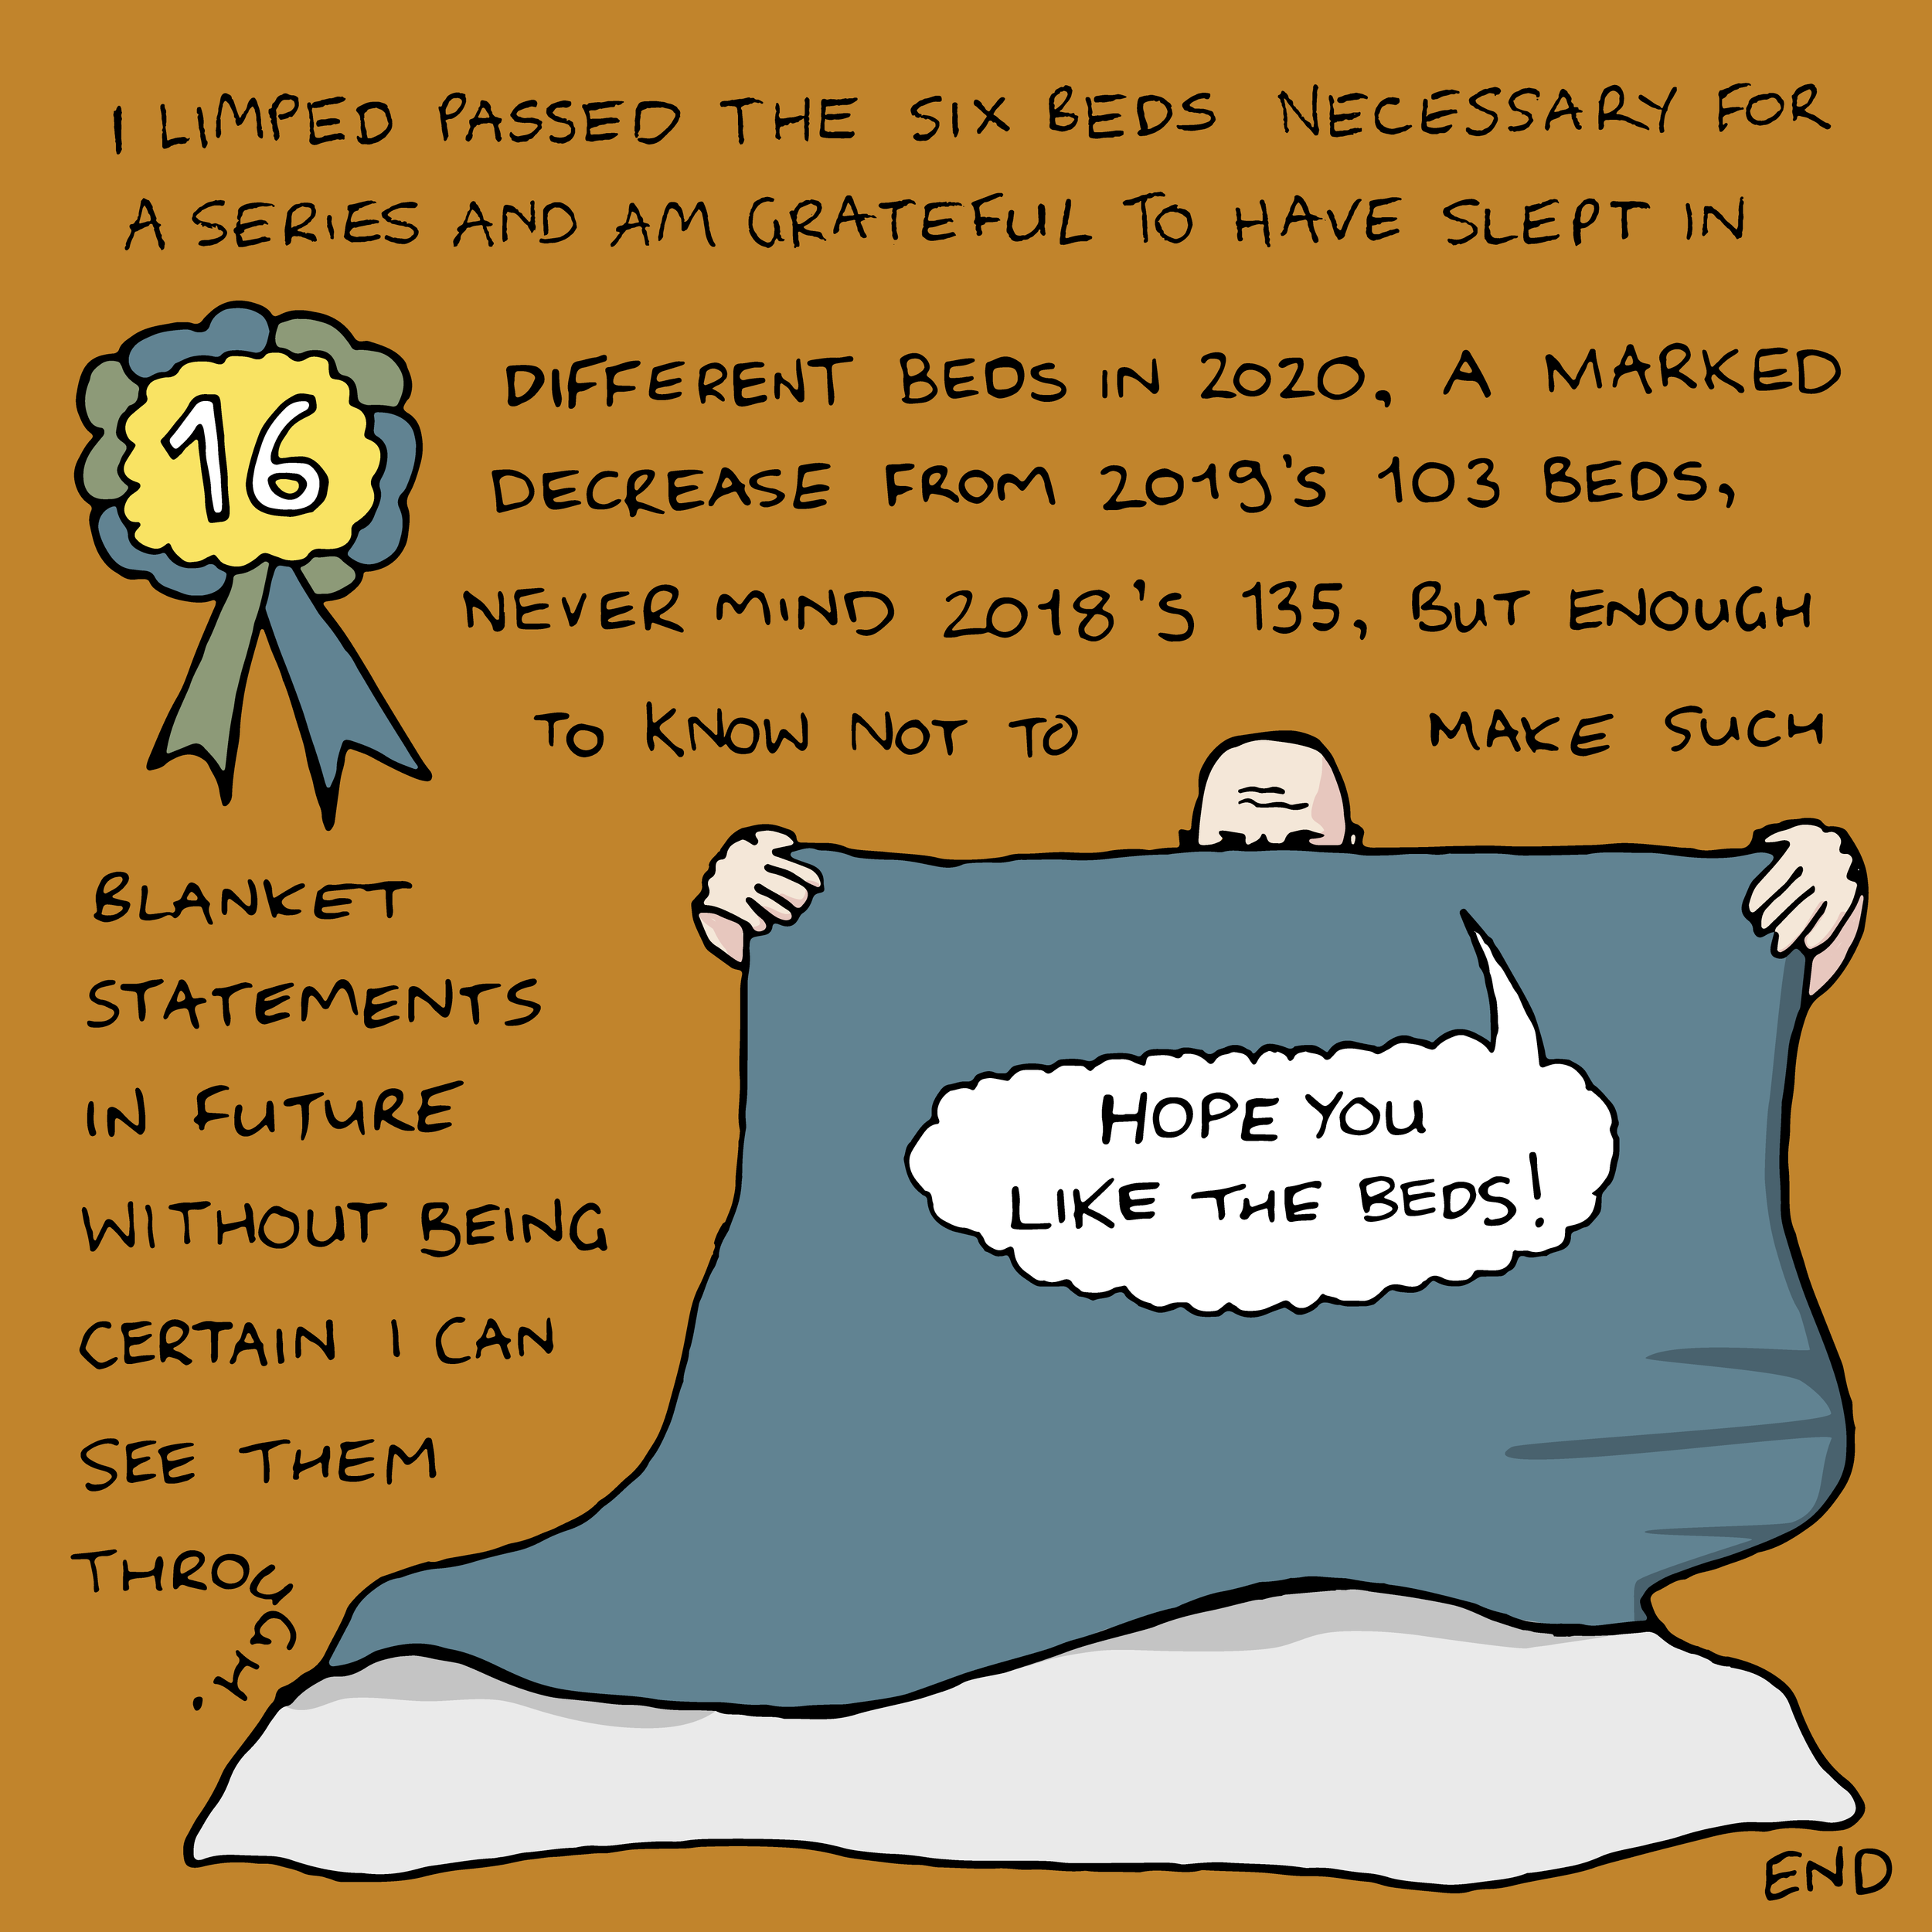 Beds0f2020-intro2-06.png